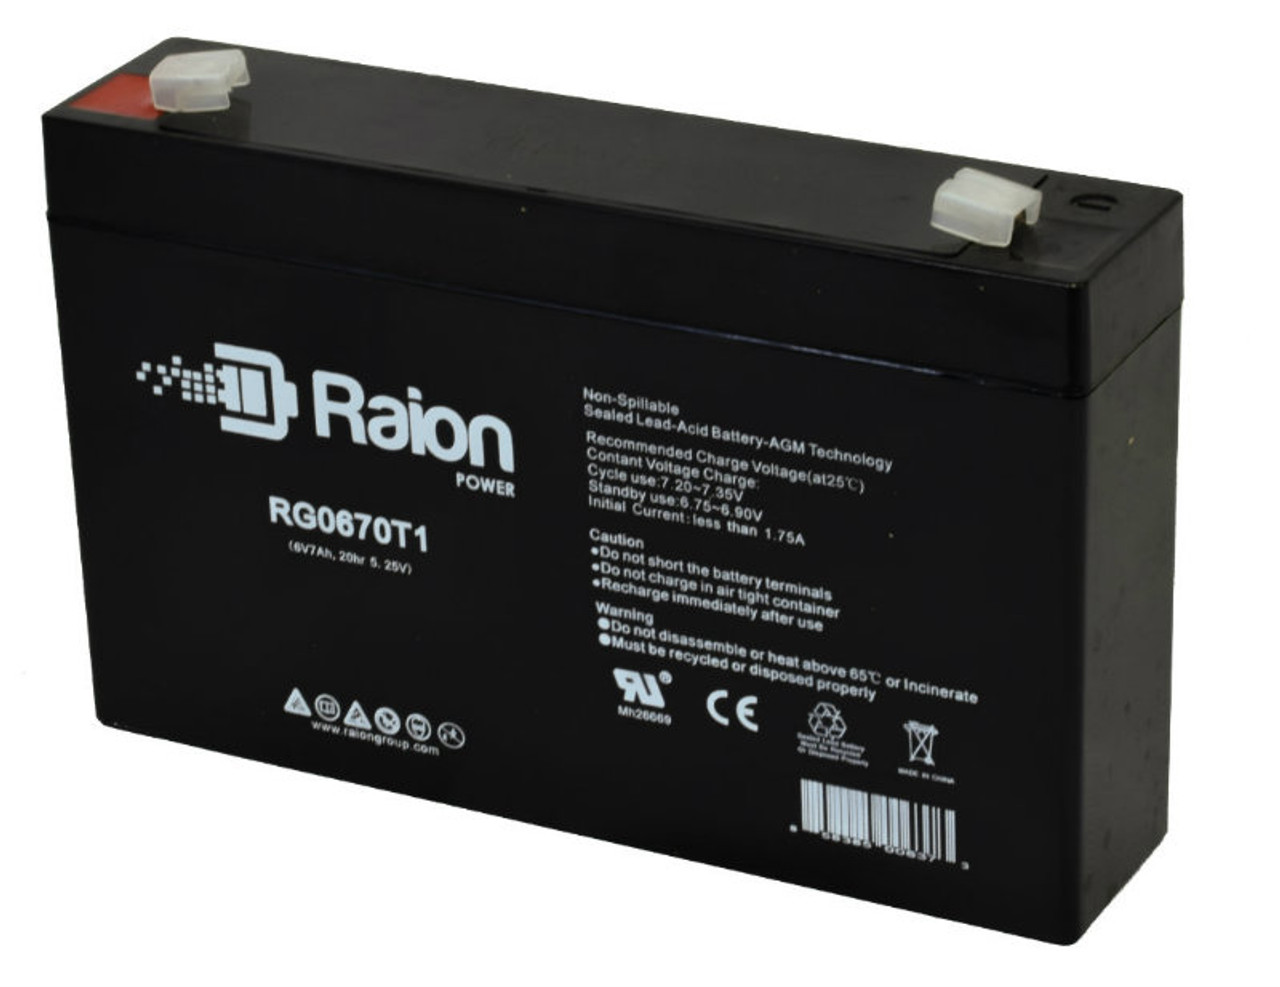 Raion Power RG0670T1 6V 7Ah Replacement Battery Cartridge for Pace Tech Vitalmax Systems 4 Medical Equipment